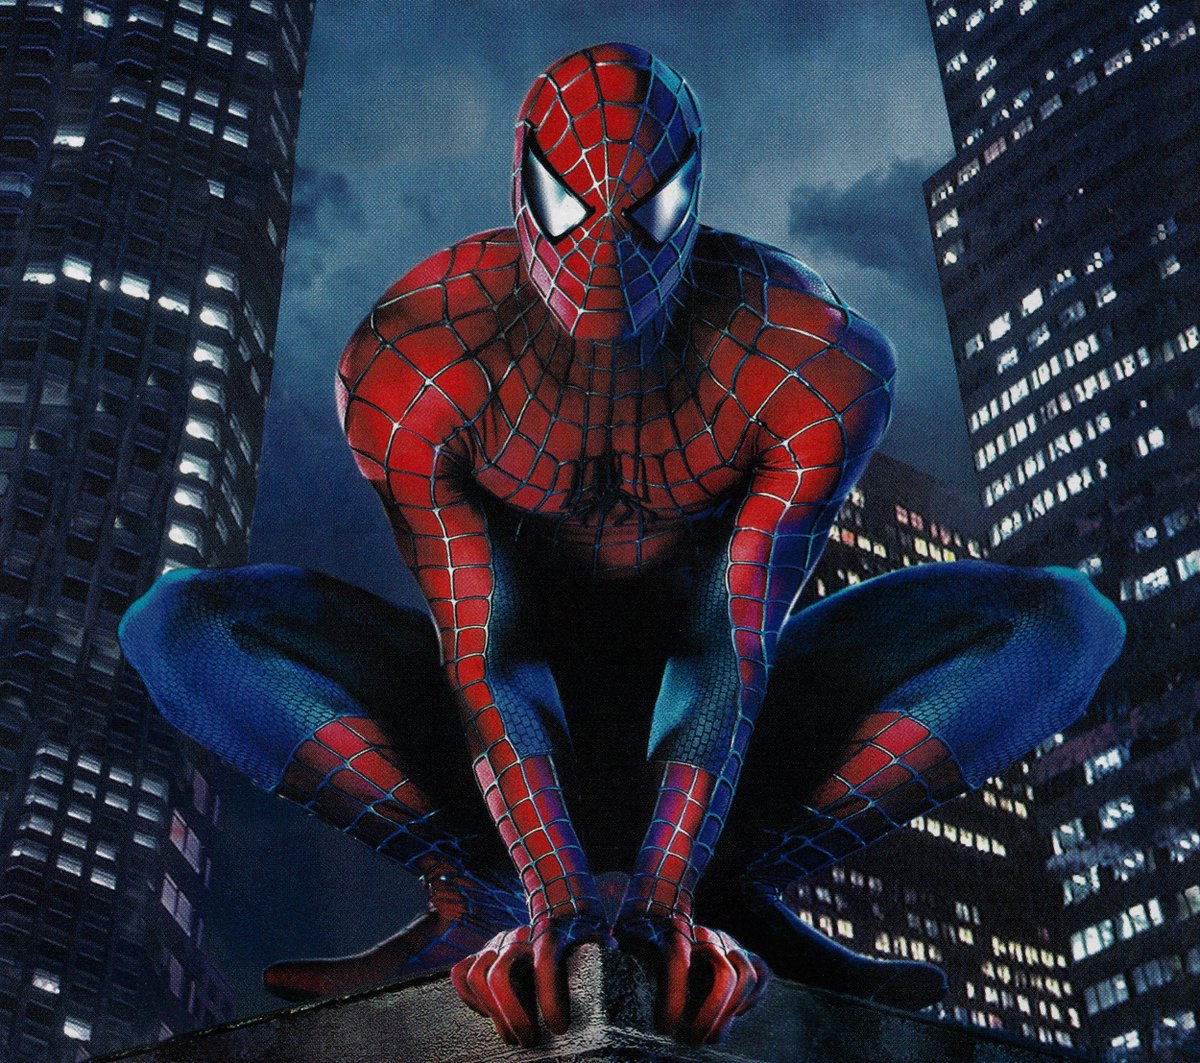 RT @EARTH_96283: High-resolution, restored scan of a rare promo image for Spider-Man (2002) https://t.co/EqE9CSwhbM